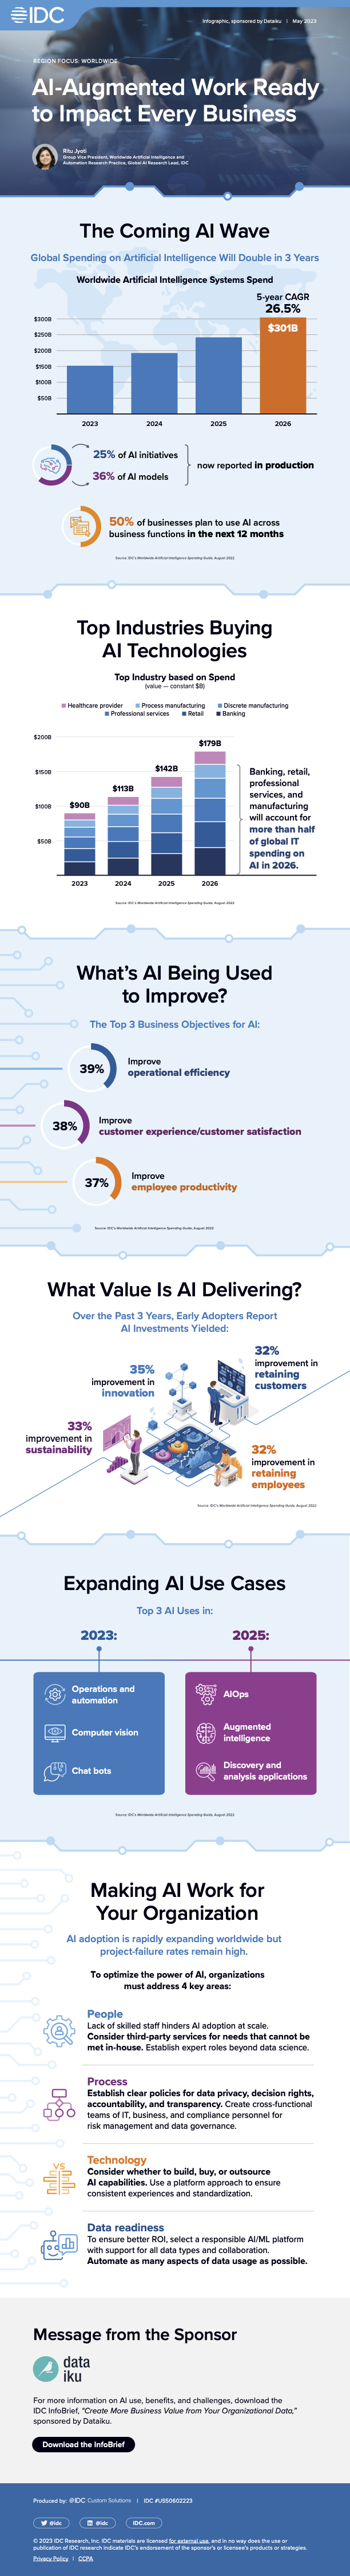 IDC AI-Augmented Work Infographic